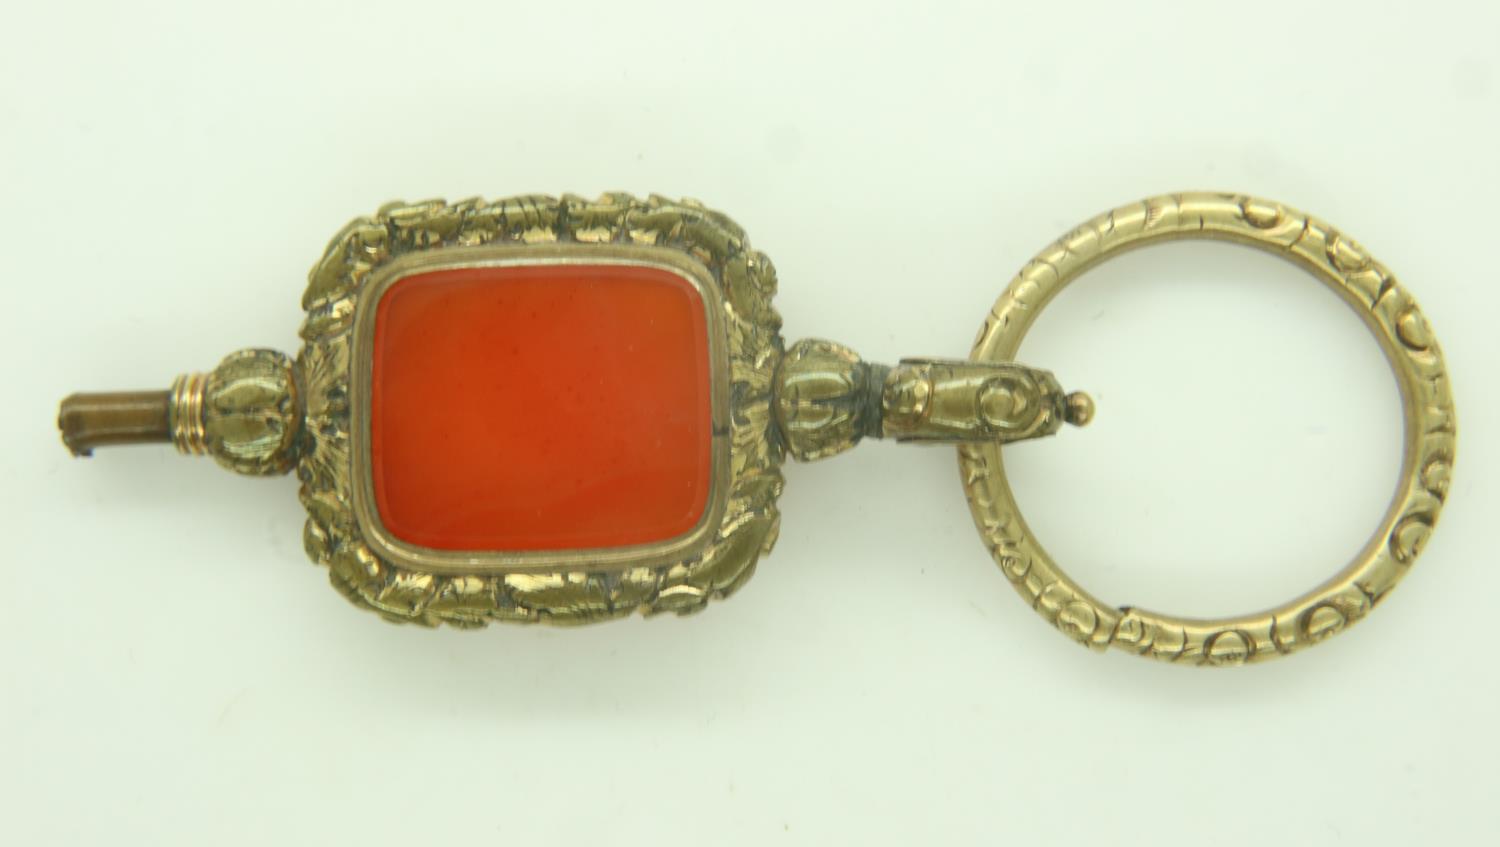 A 19th century over-sized gilt-metal pocket watch key, set with a panel of agate. P&P Group 0 (£6+ - Image 2 of 2